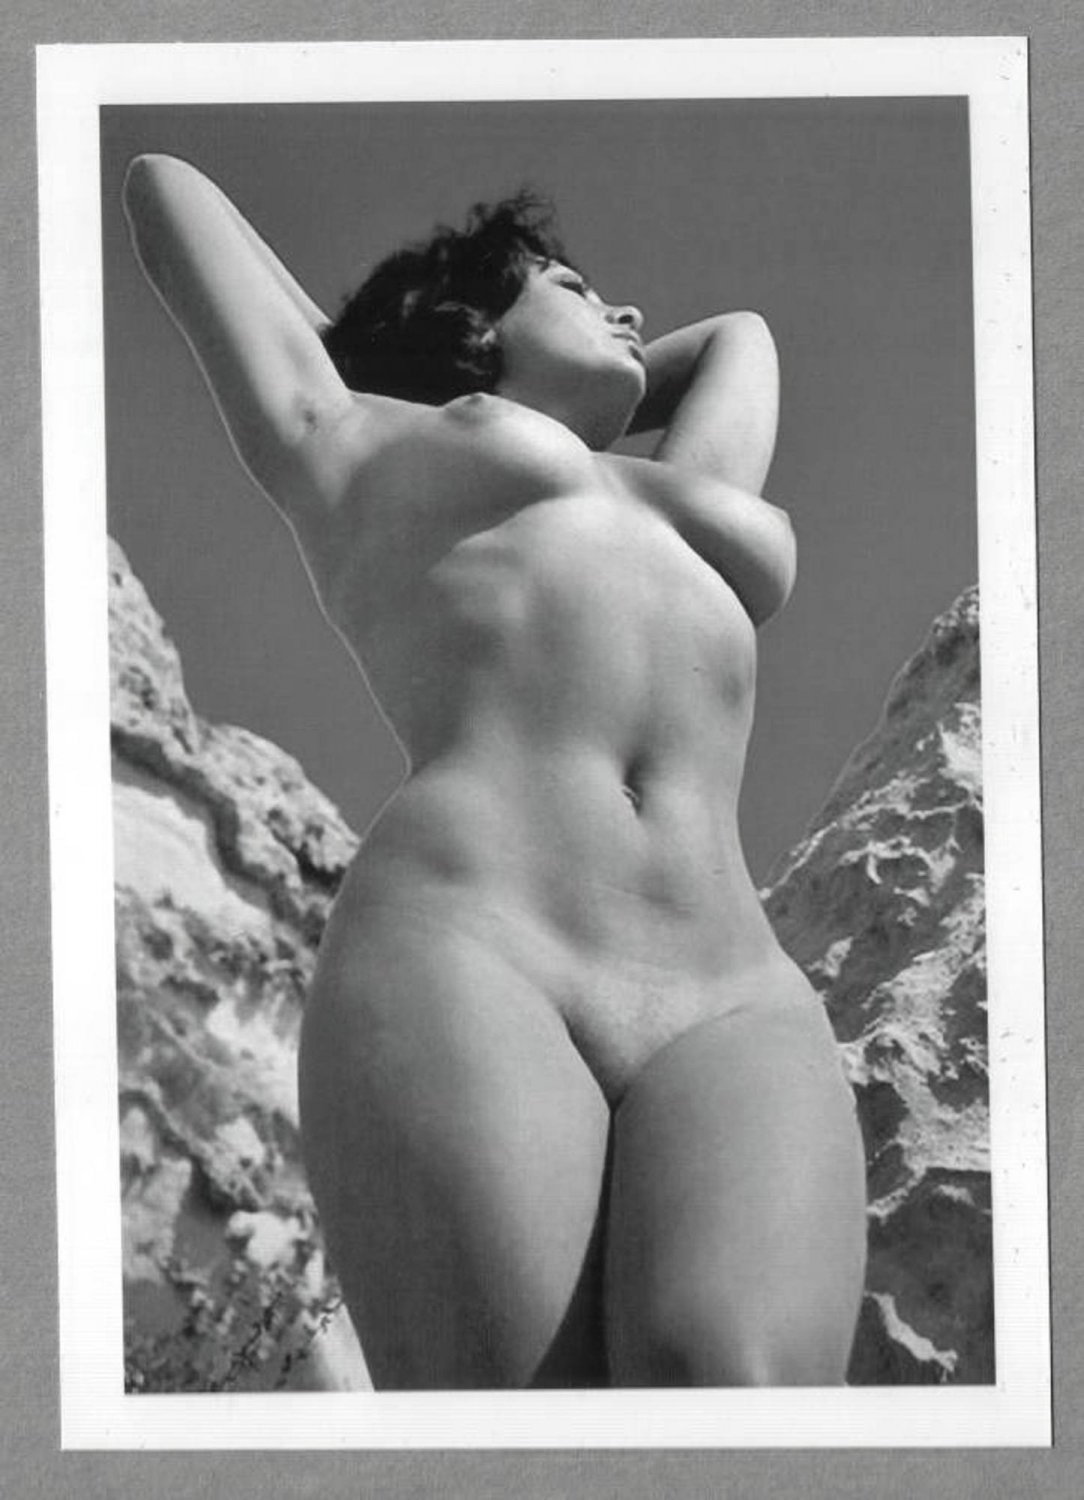 June palmer totally nude new reprint photo 5X7 #19.